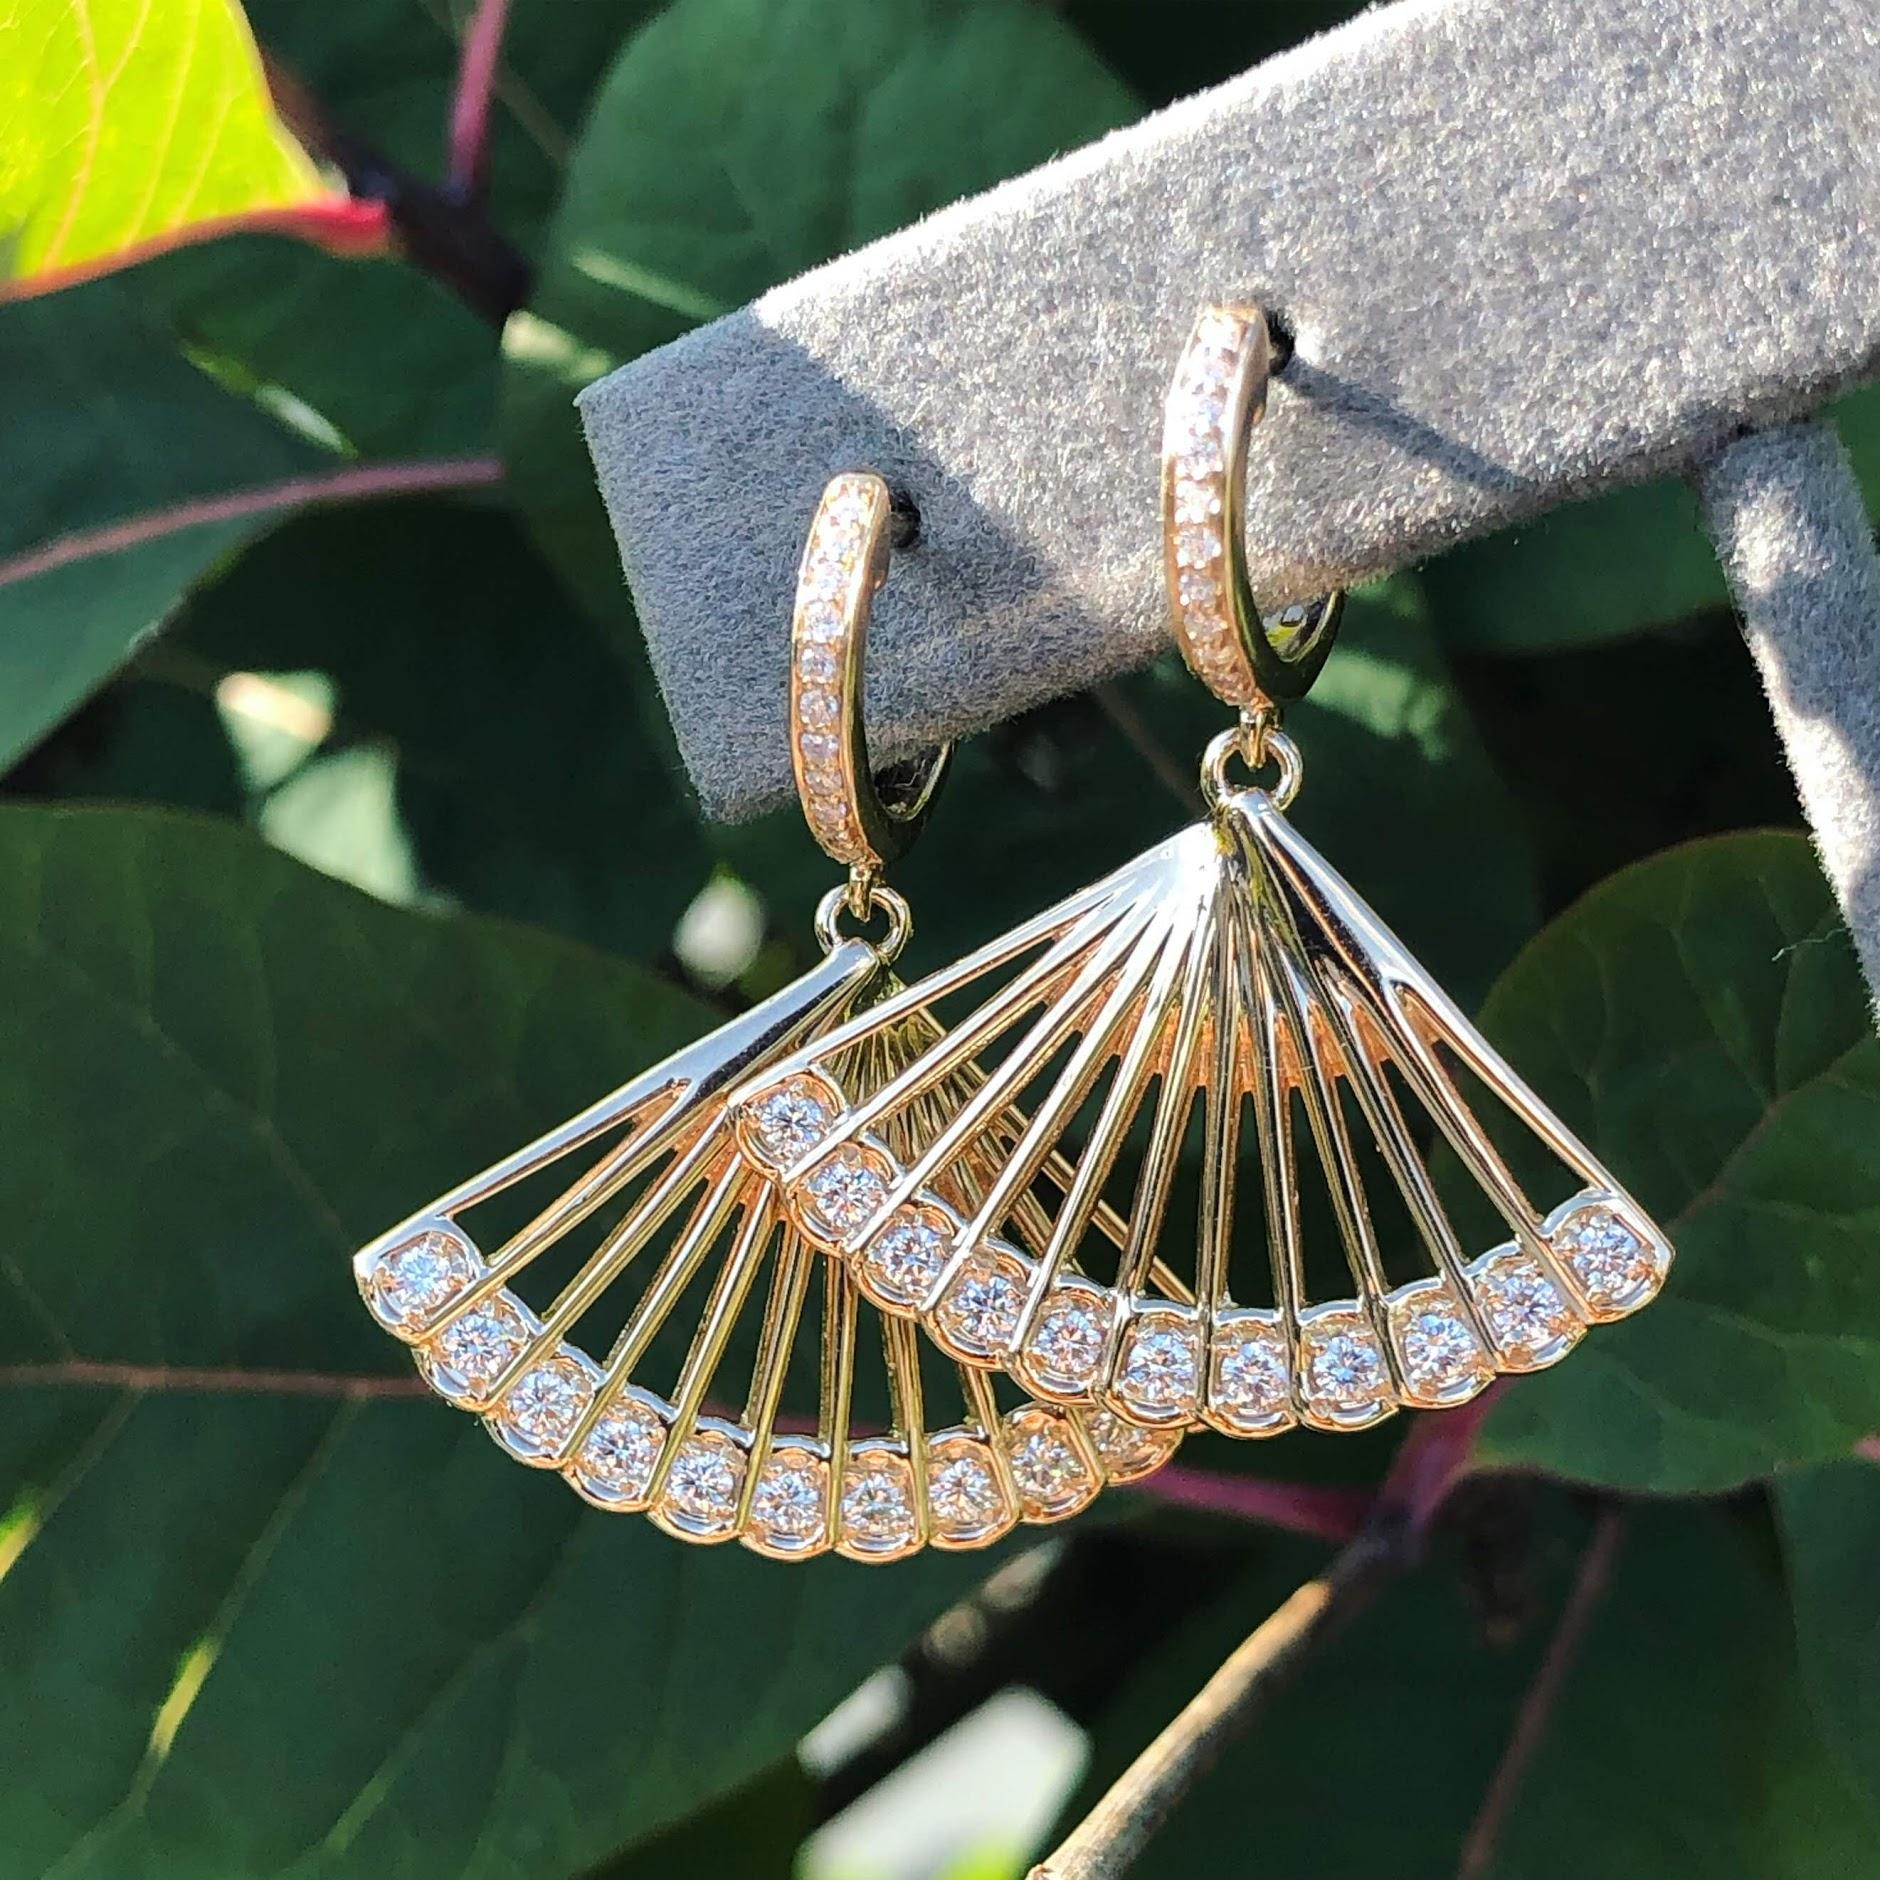 From SELIN KENT's fan-inspired Zoe Capsule, these drop earrings feature hoop earrings and a flattering fan-inspired shape with white diamond accents.

- Total carat weight: 0.6
- Total drop: 2.5'' 
- 14k Yellow Gold
